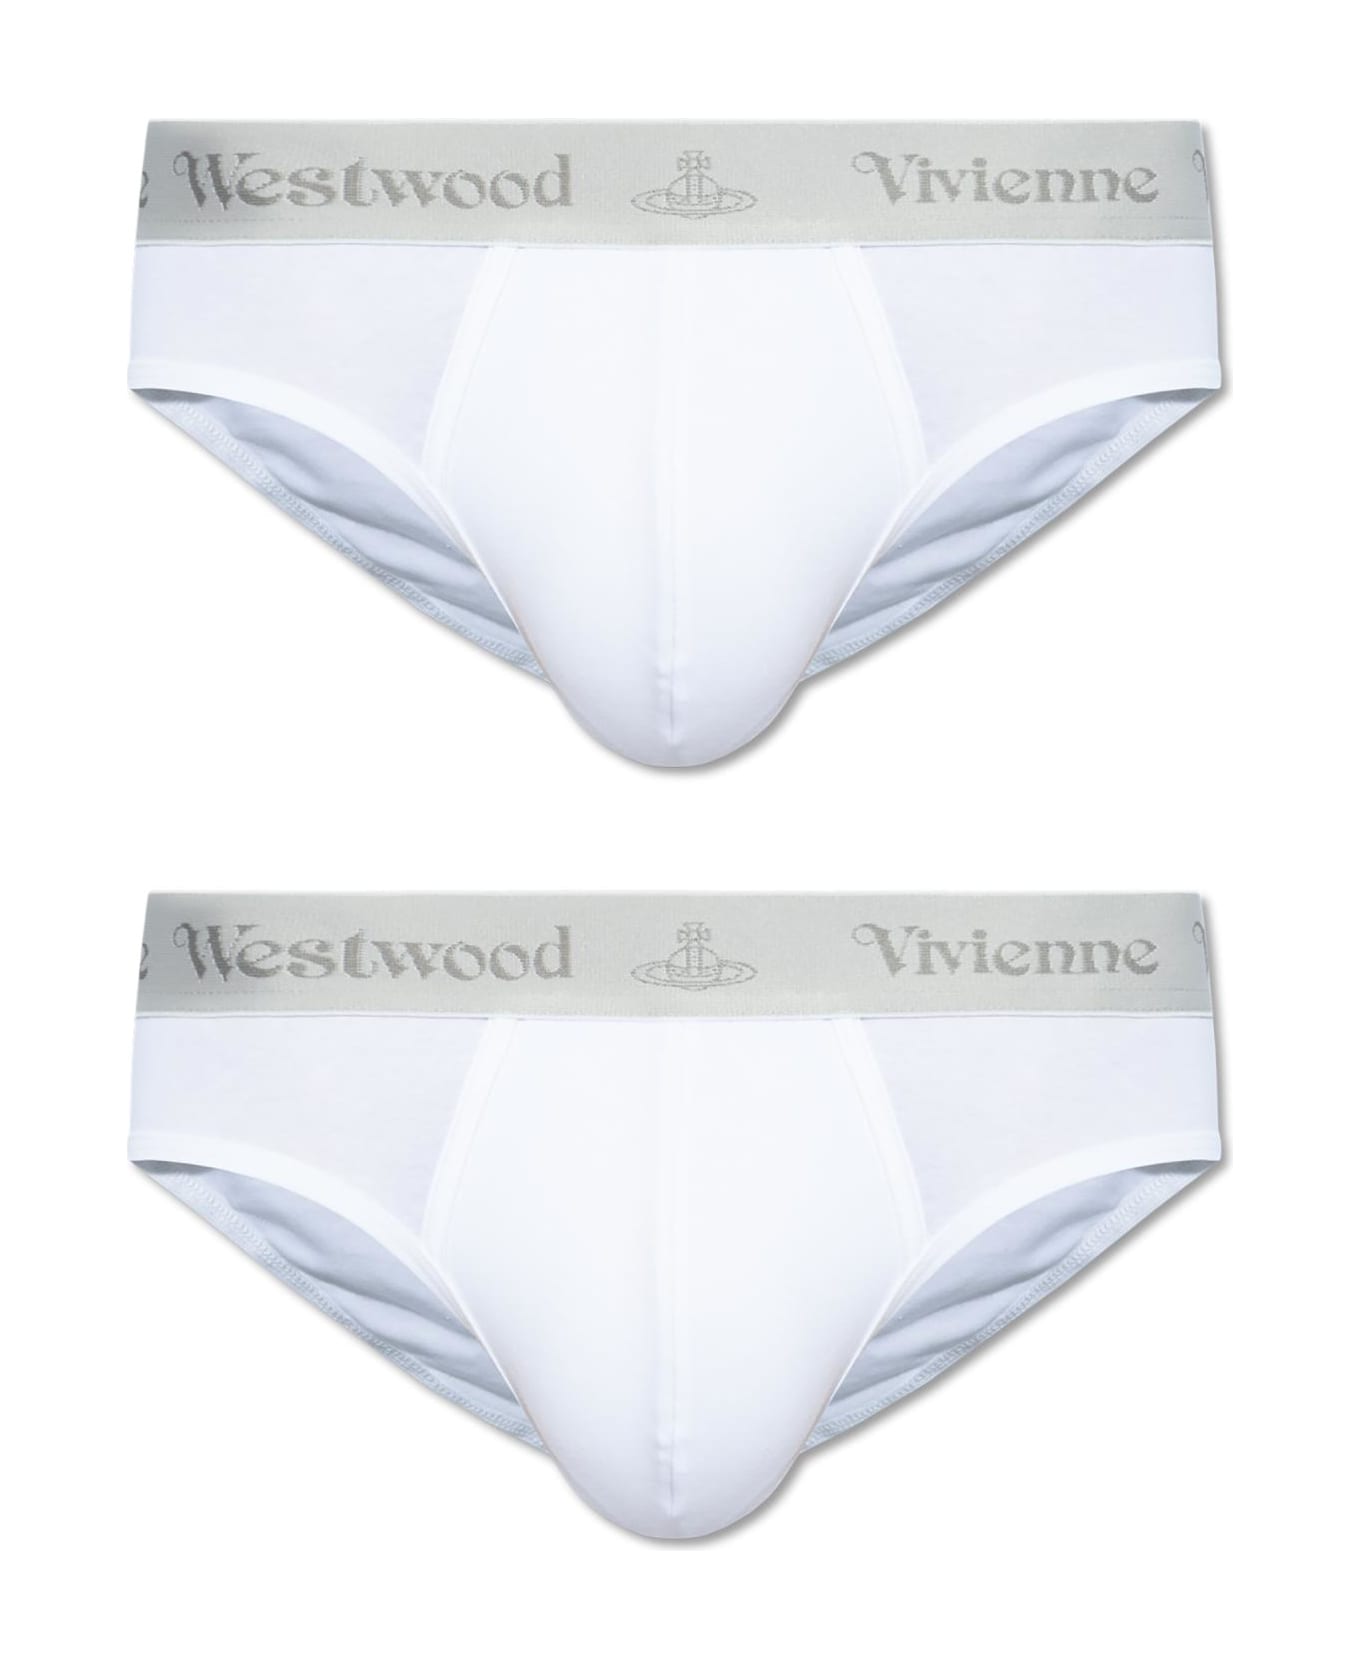 Vivienne Westwood Two-pack Of Briefs - WHITE